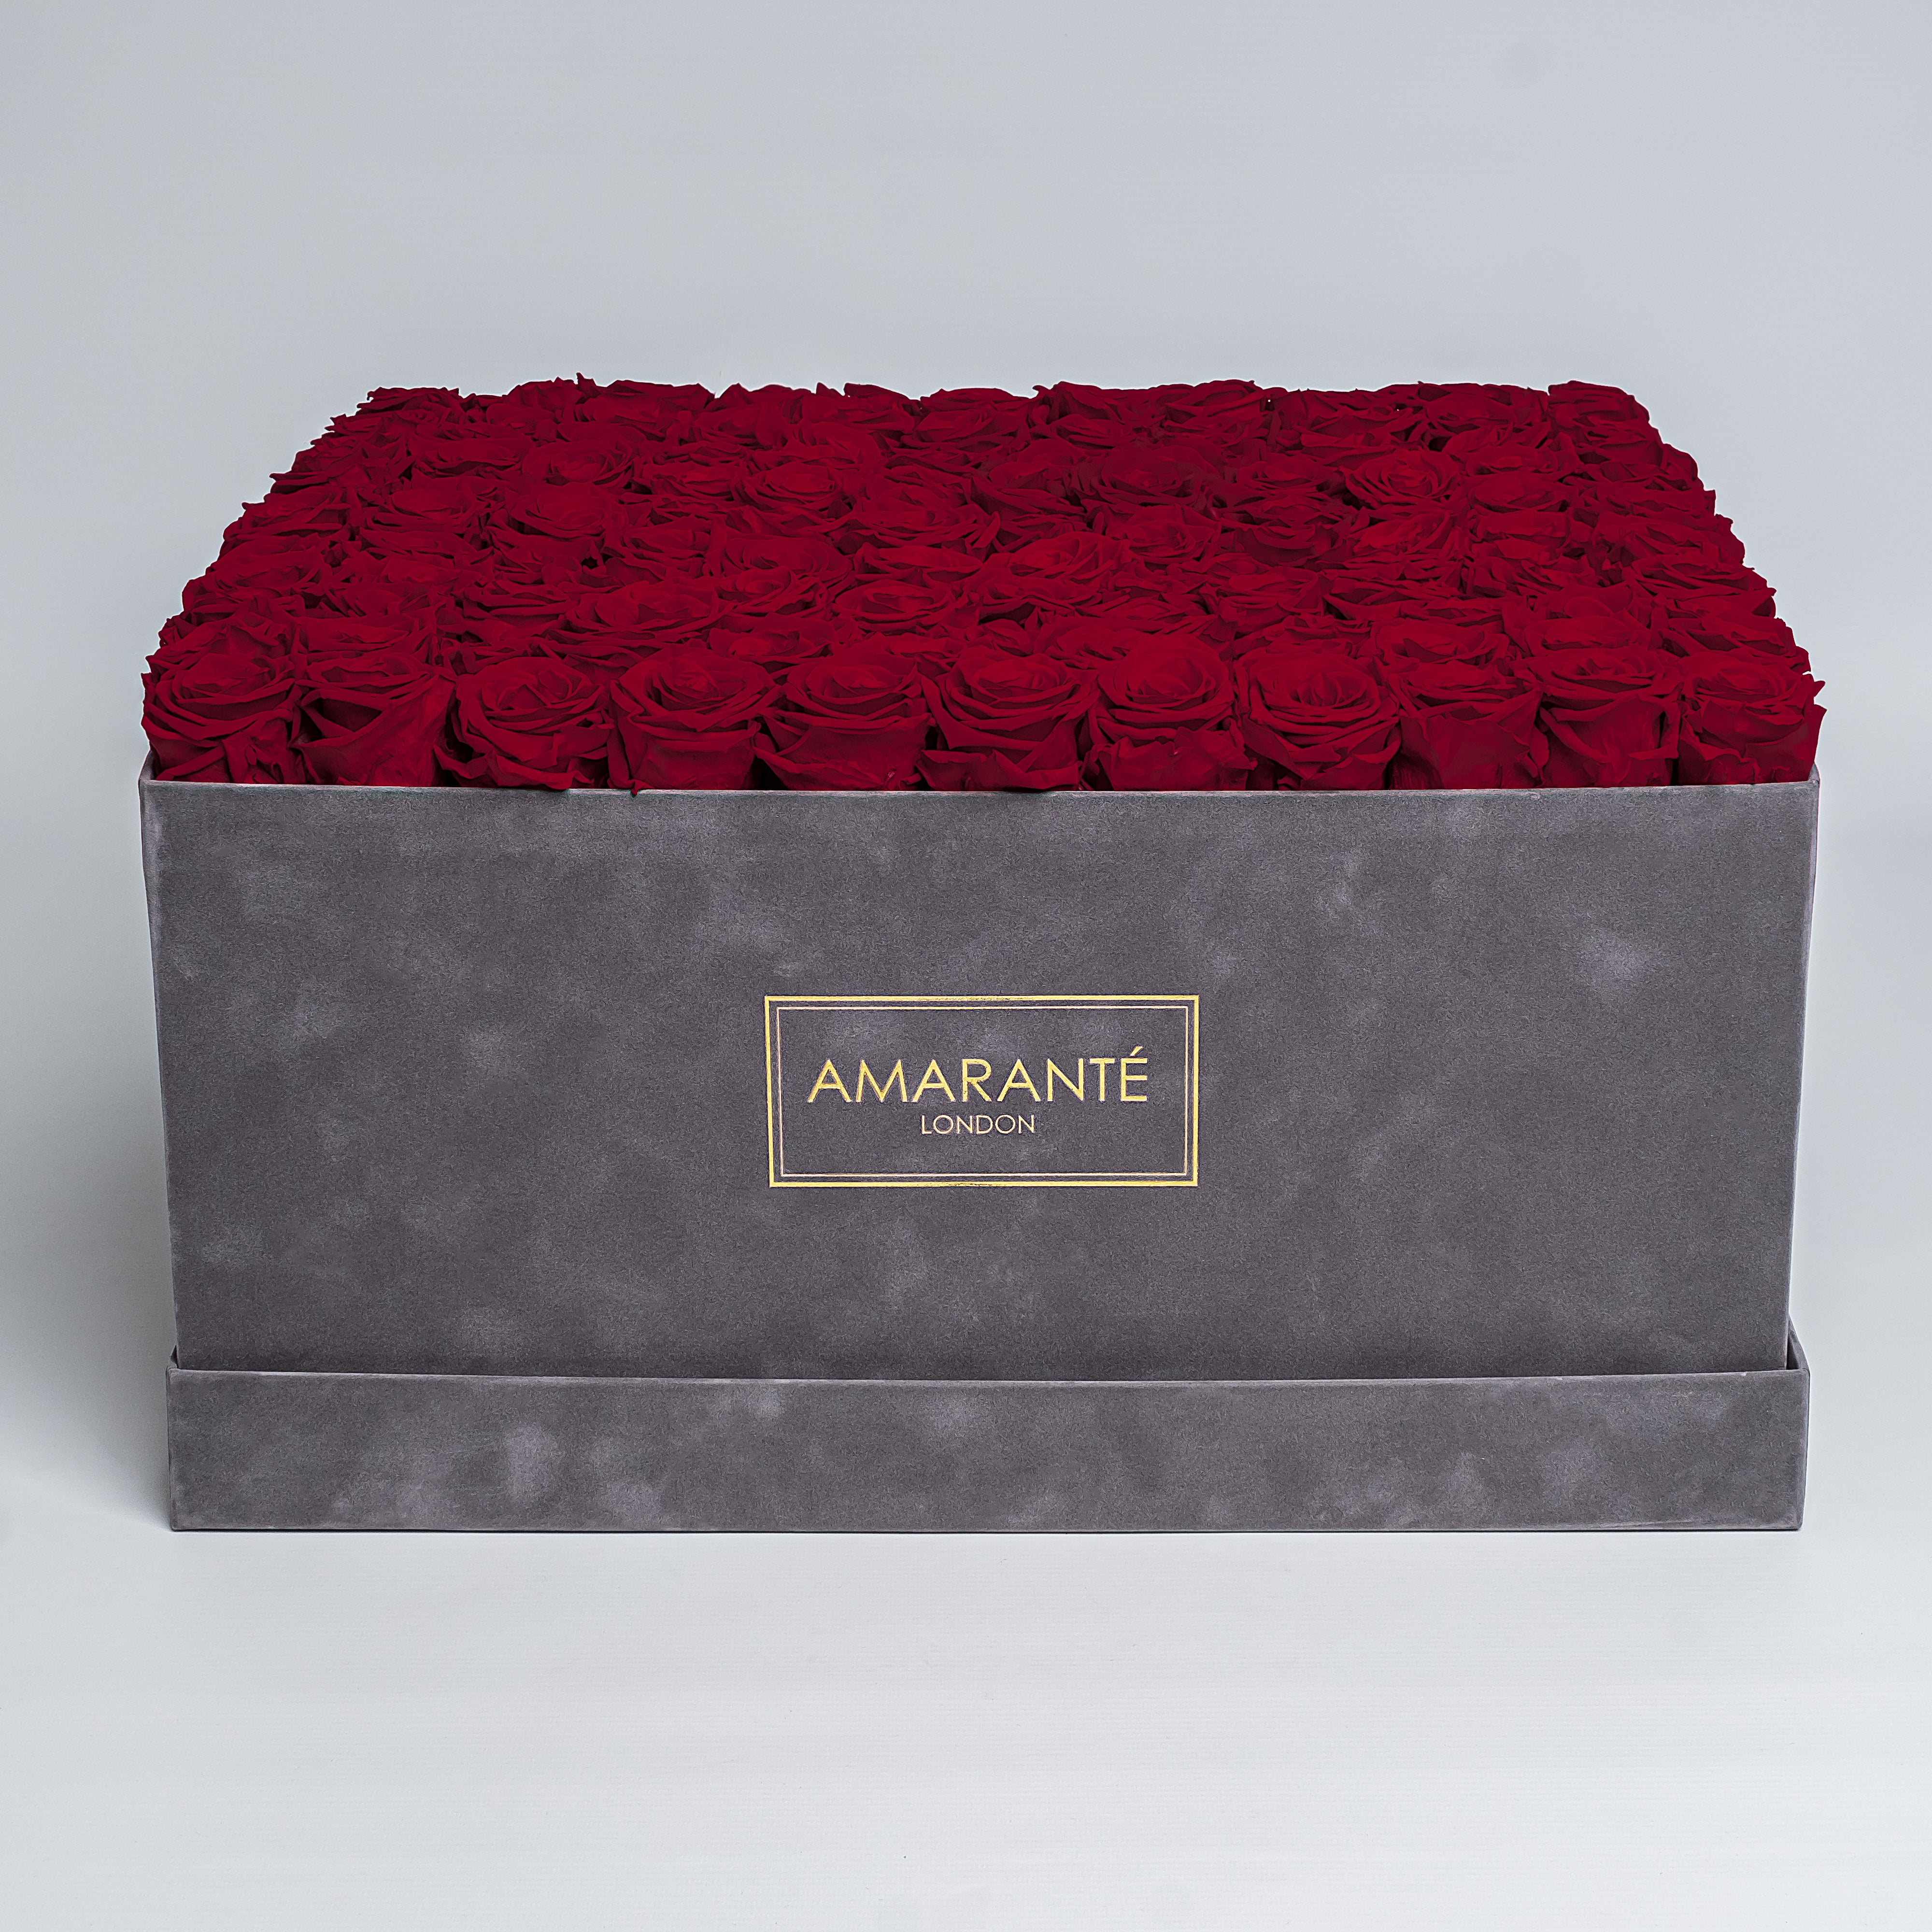 Super deluxe grey square hatbox with 150 deep-red infinity roses, offering a touch of elegance and everlasting love. Free UK delivery. Luxurious 20"x20" Rose Box, Roses are customisable in 14 delicate pastel colours.